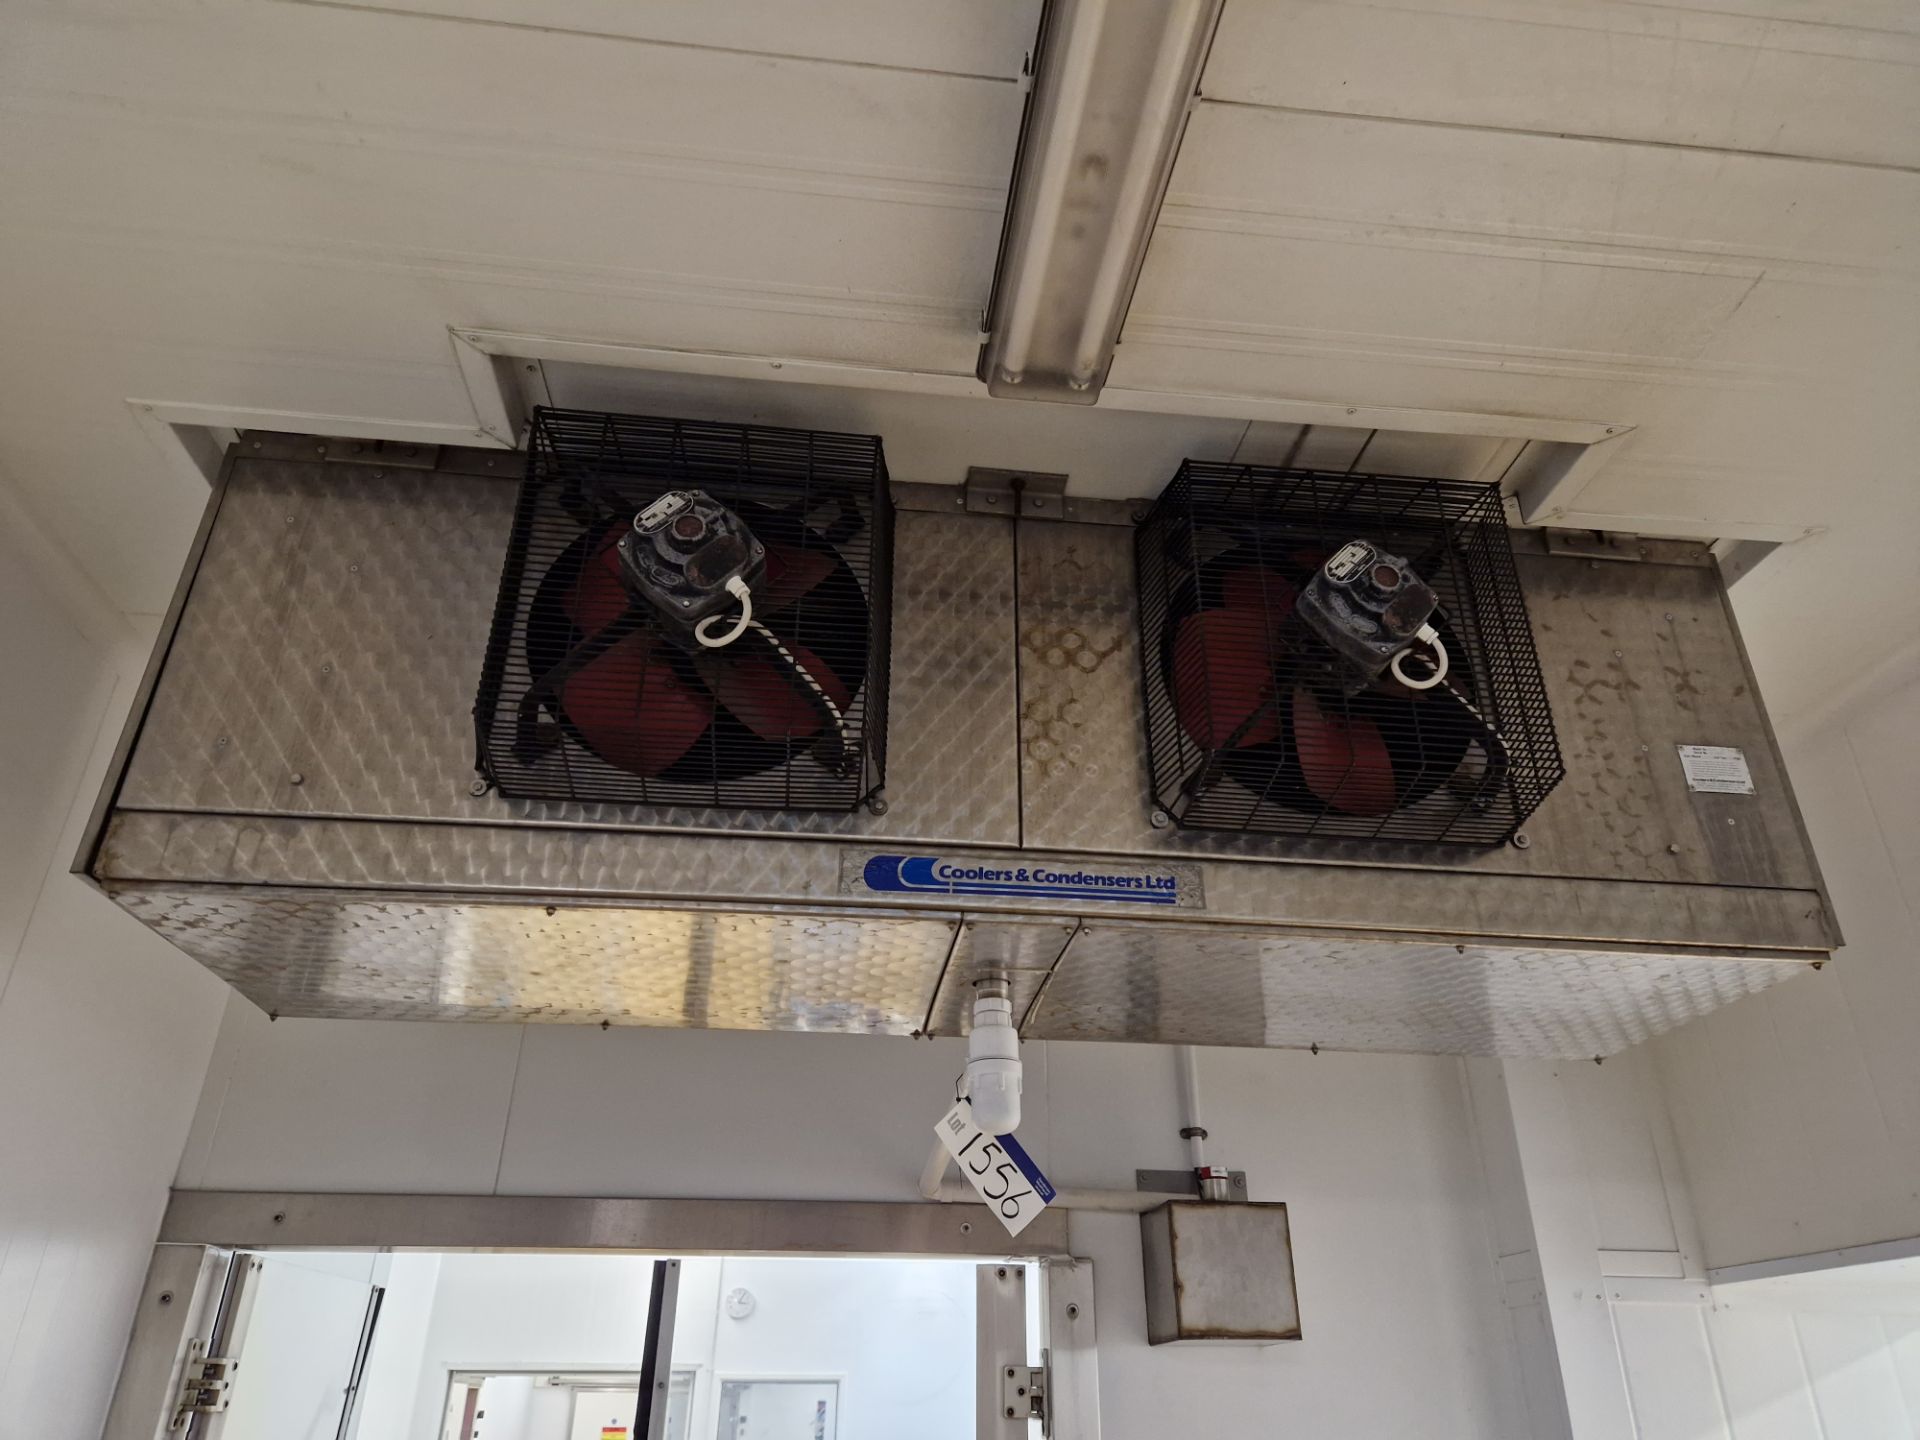 Coolers & Condensers Ltd SPEC CA Twin Fan Evaporator (Evaporator must be disconnected at closest